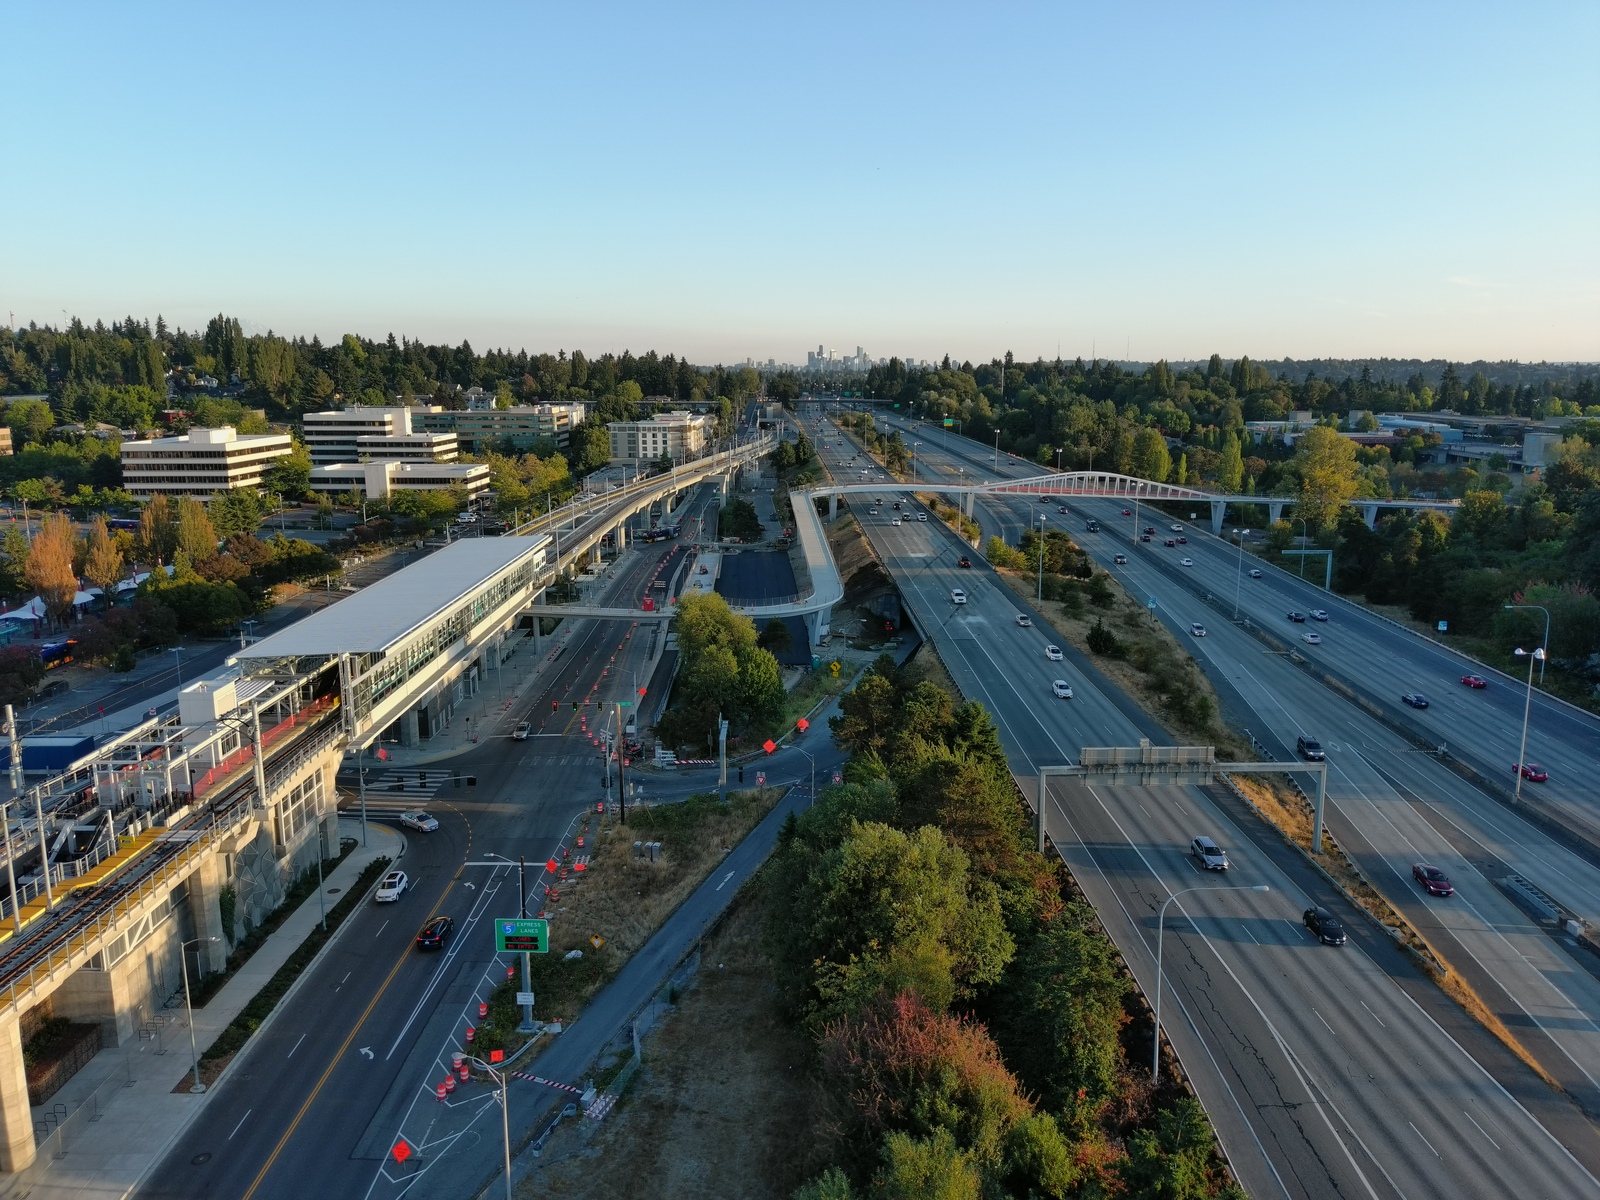 An aerial view of the Northgate Link light rail station